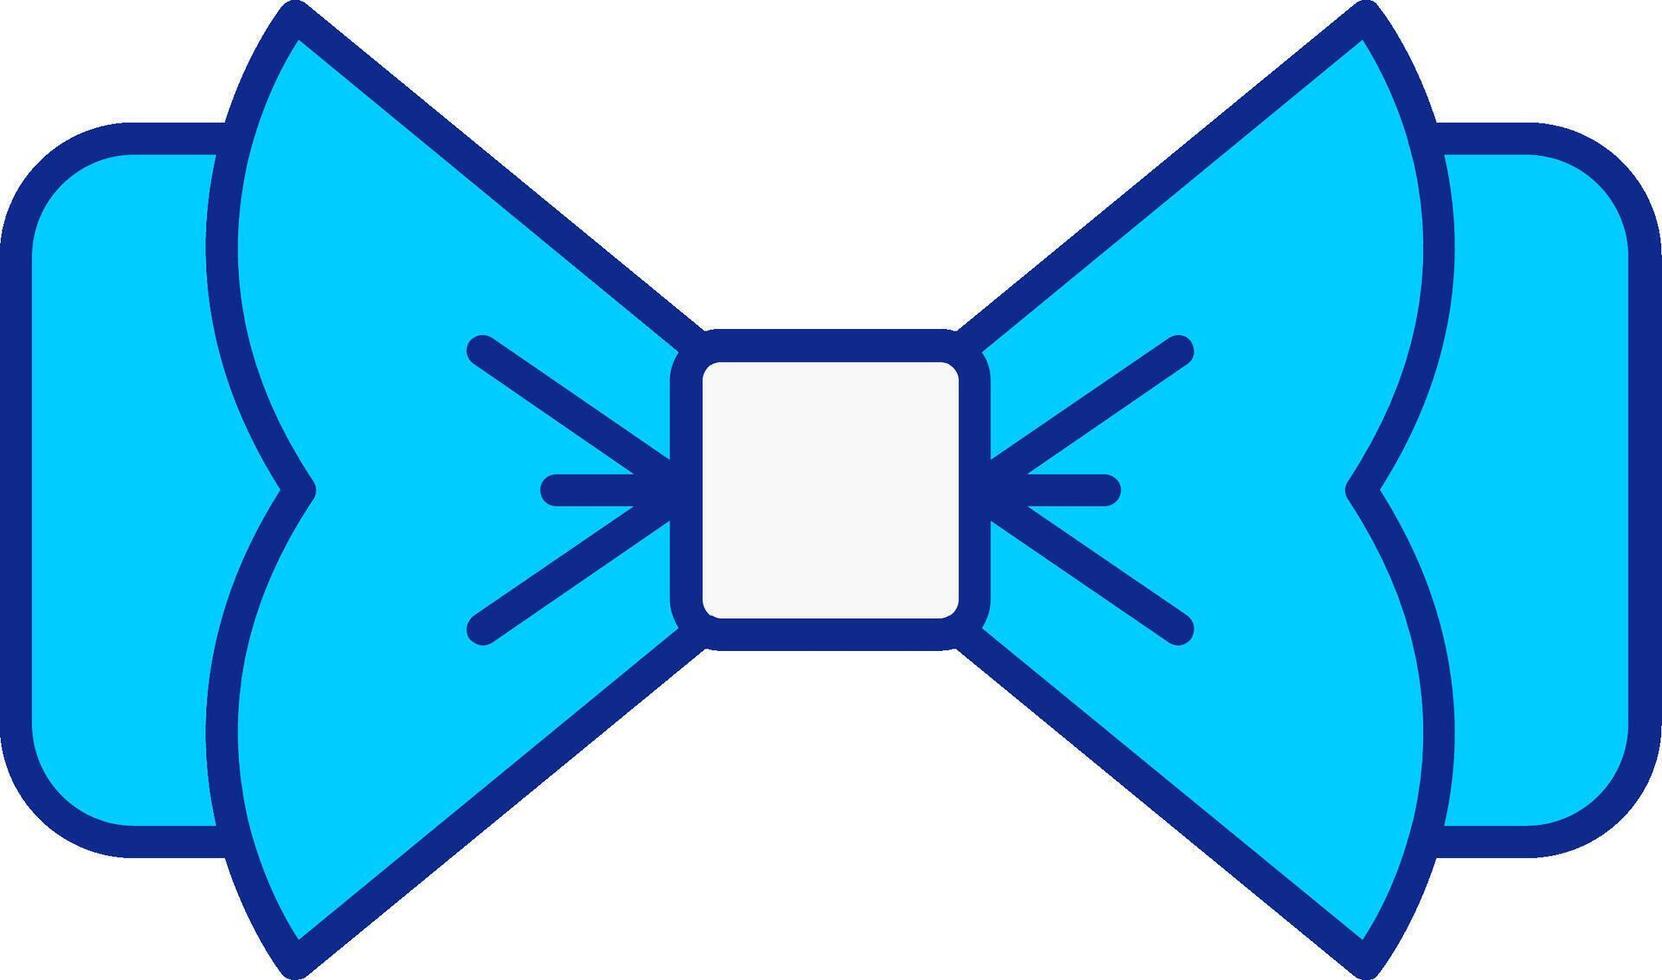 Bow Tie Blue Filled Icon vector